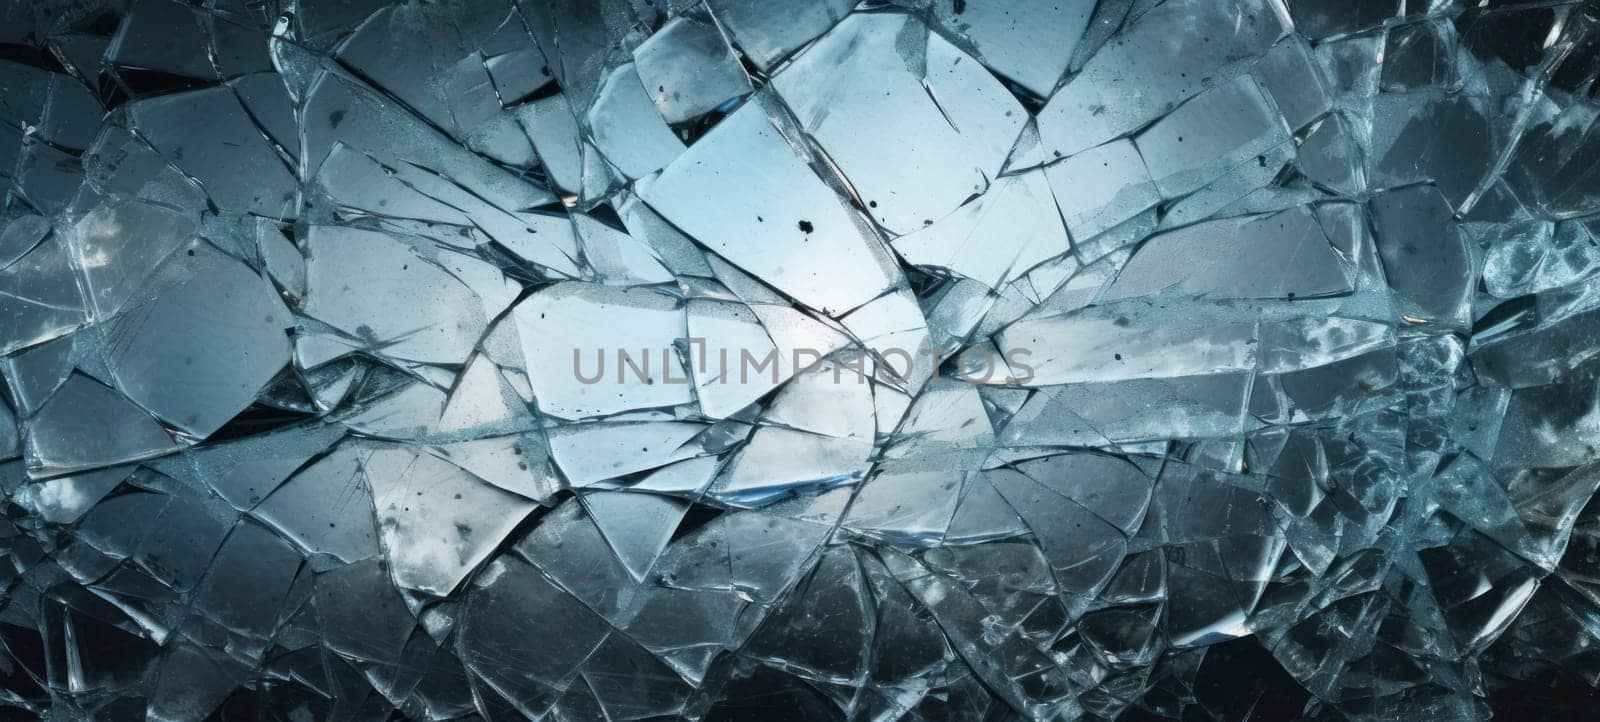 A close-up of a shattered glass pane, showcasing an intricate pattern of cracks and textures on a blue-toned background.